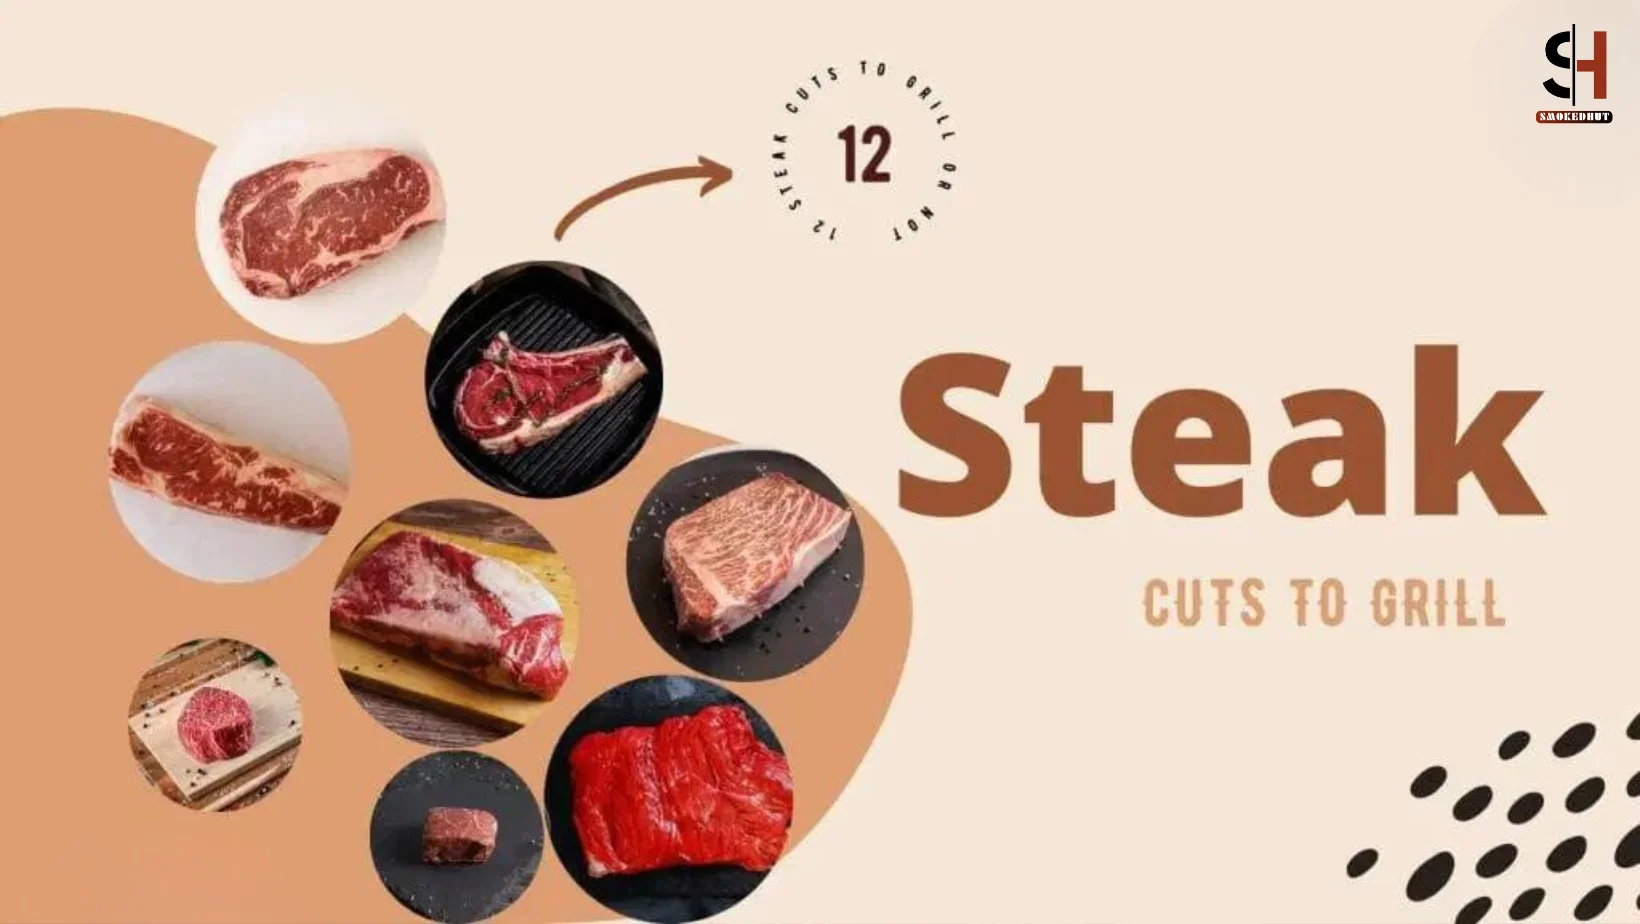 12 Steak Cuts To Grill or Not Ranked from Best to Worst